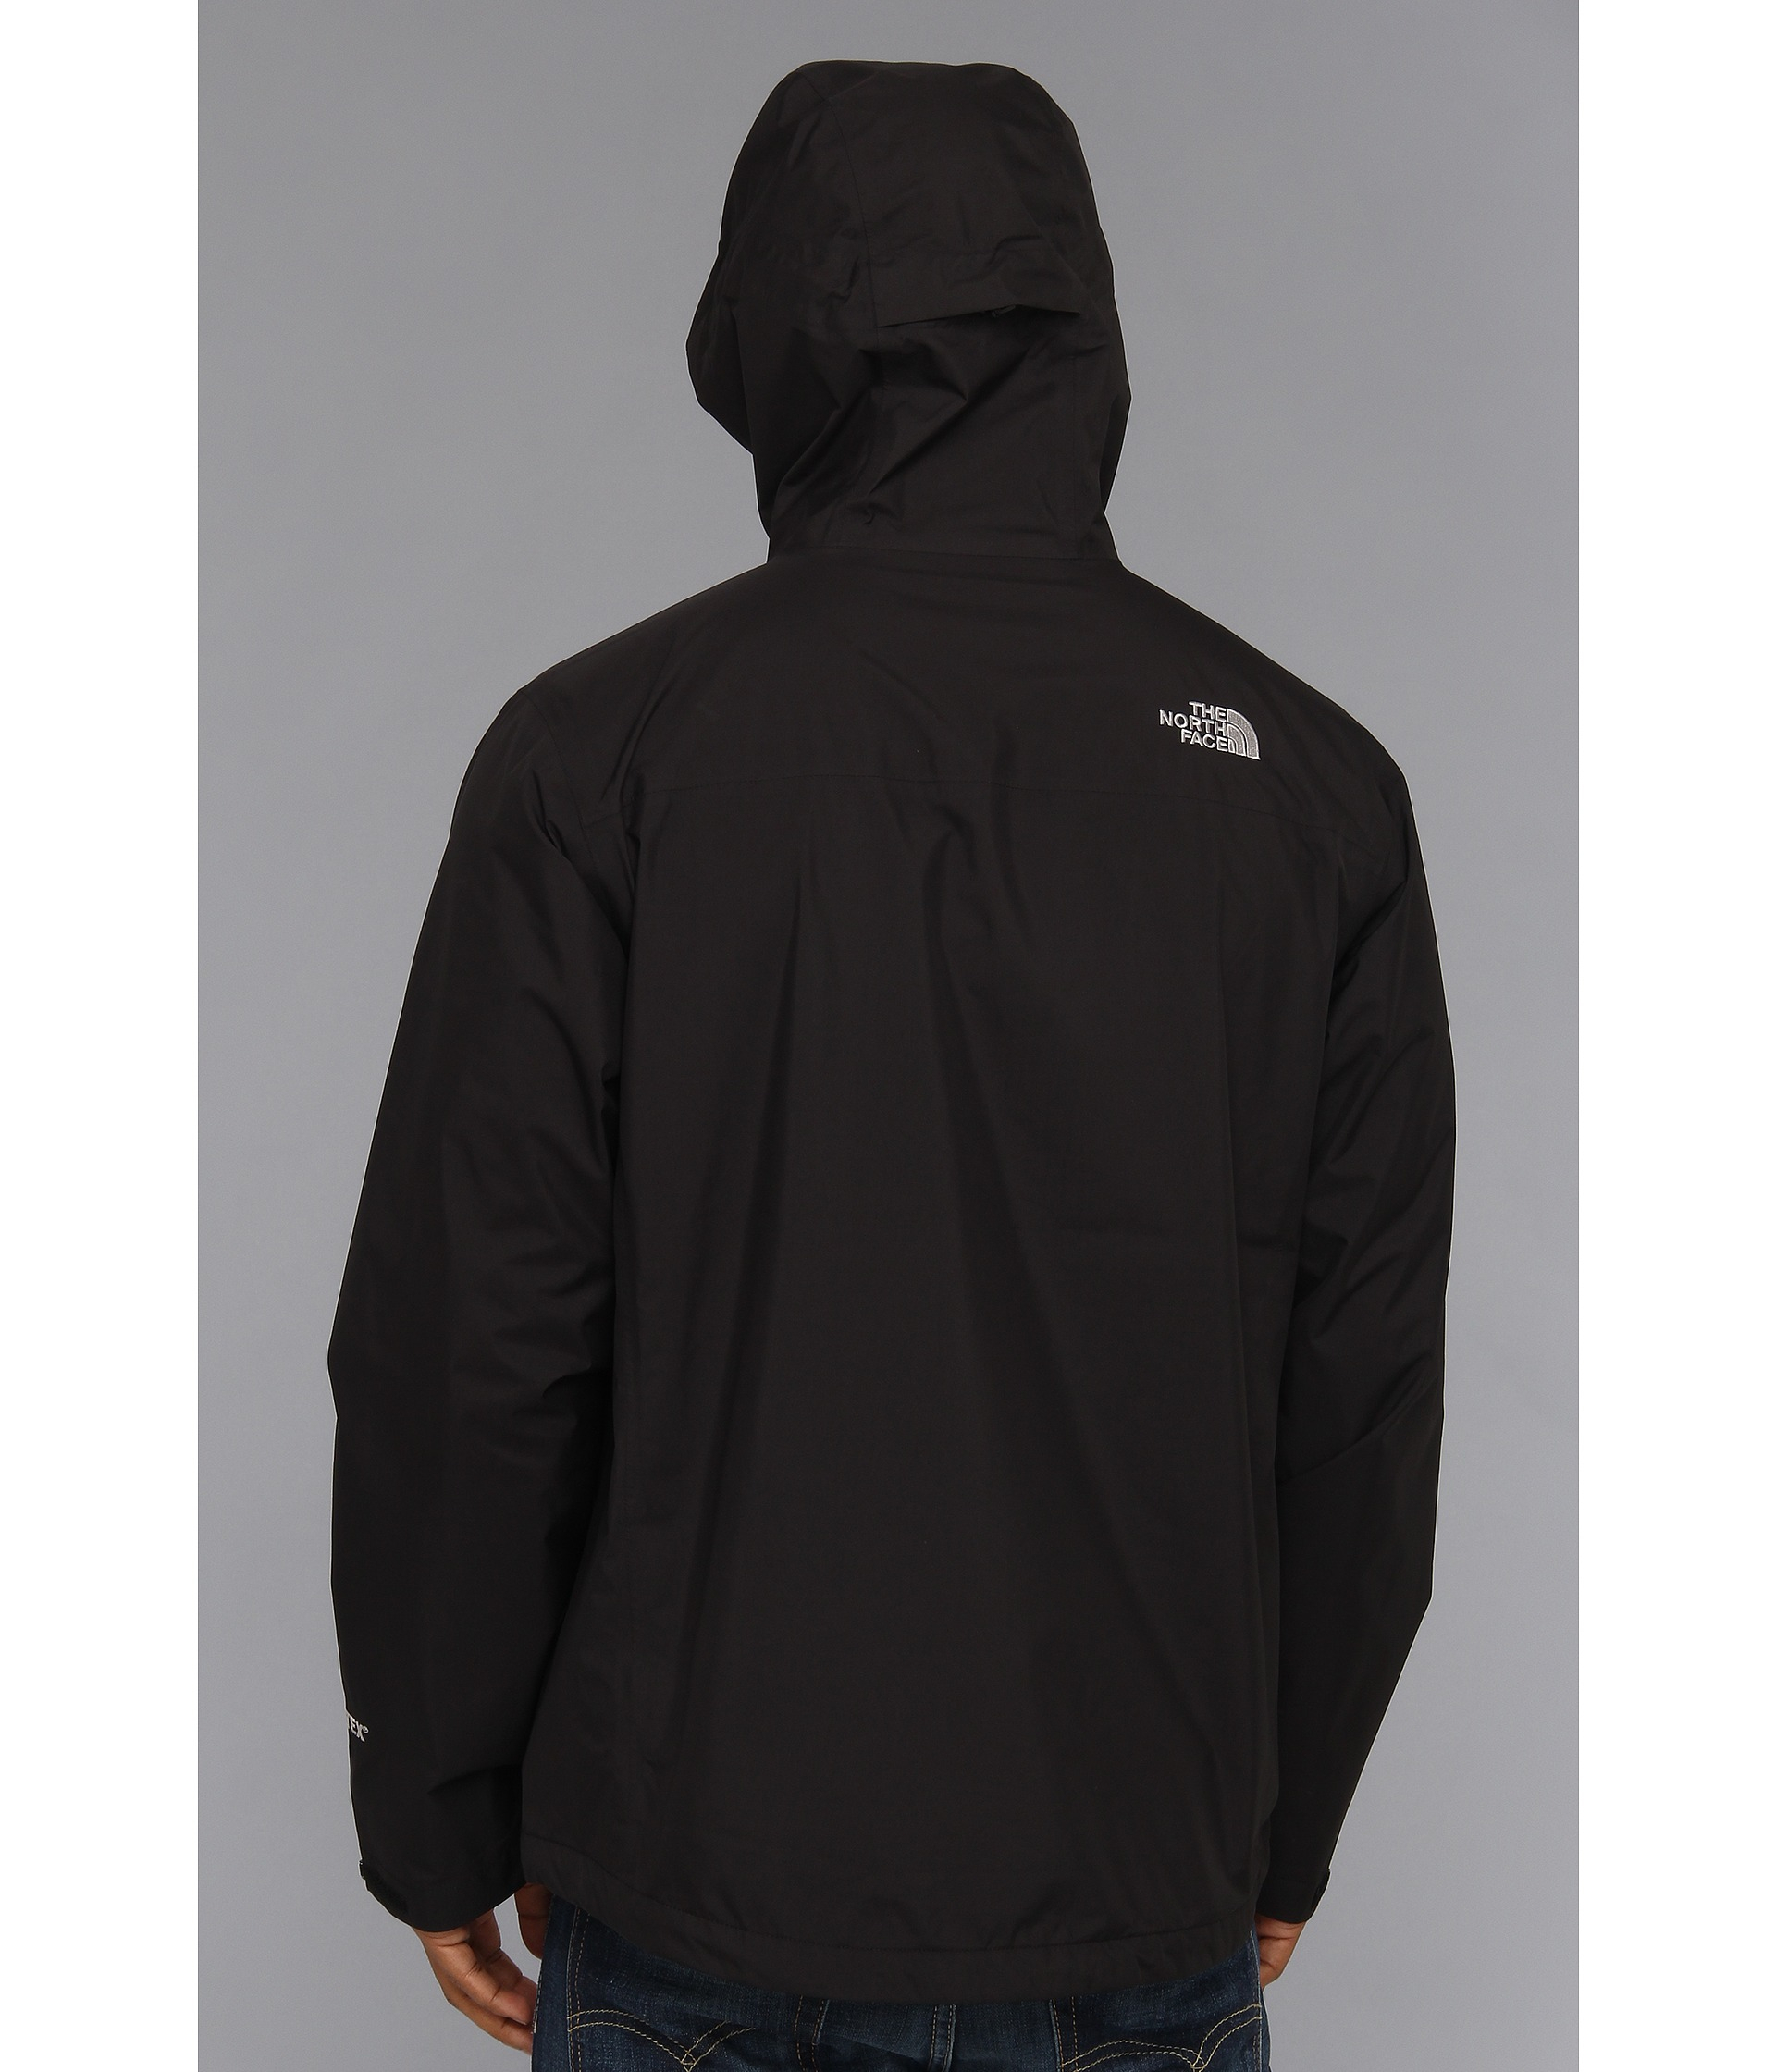 The North Face Synthetic Dryzzle Jacket in Black for Men - Lyst